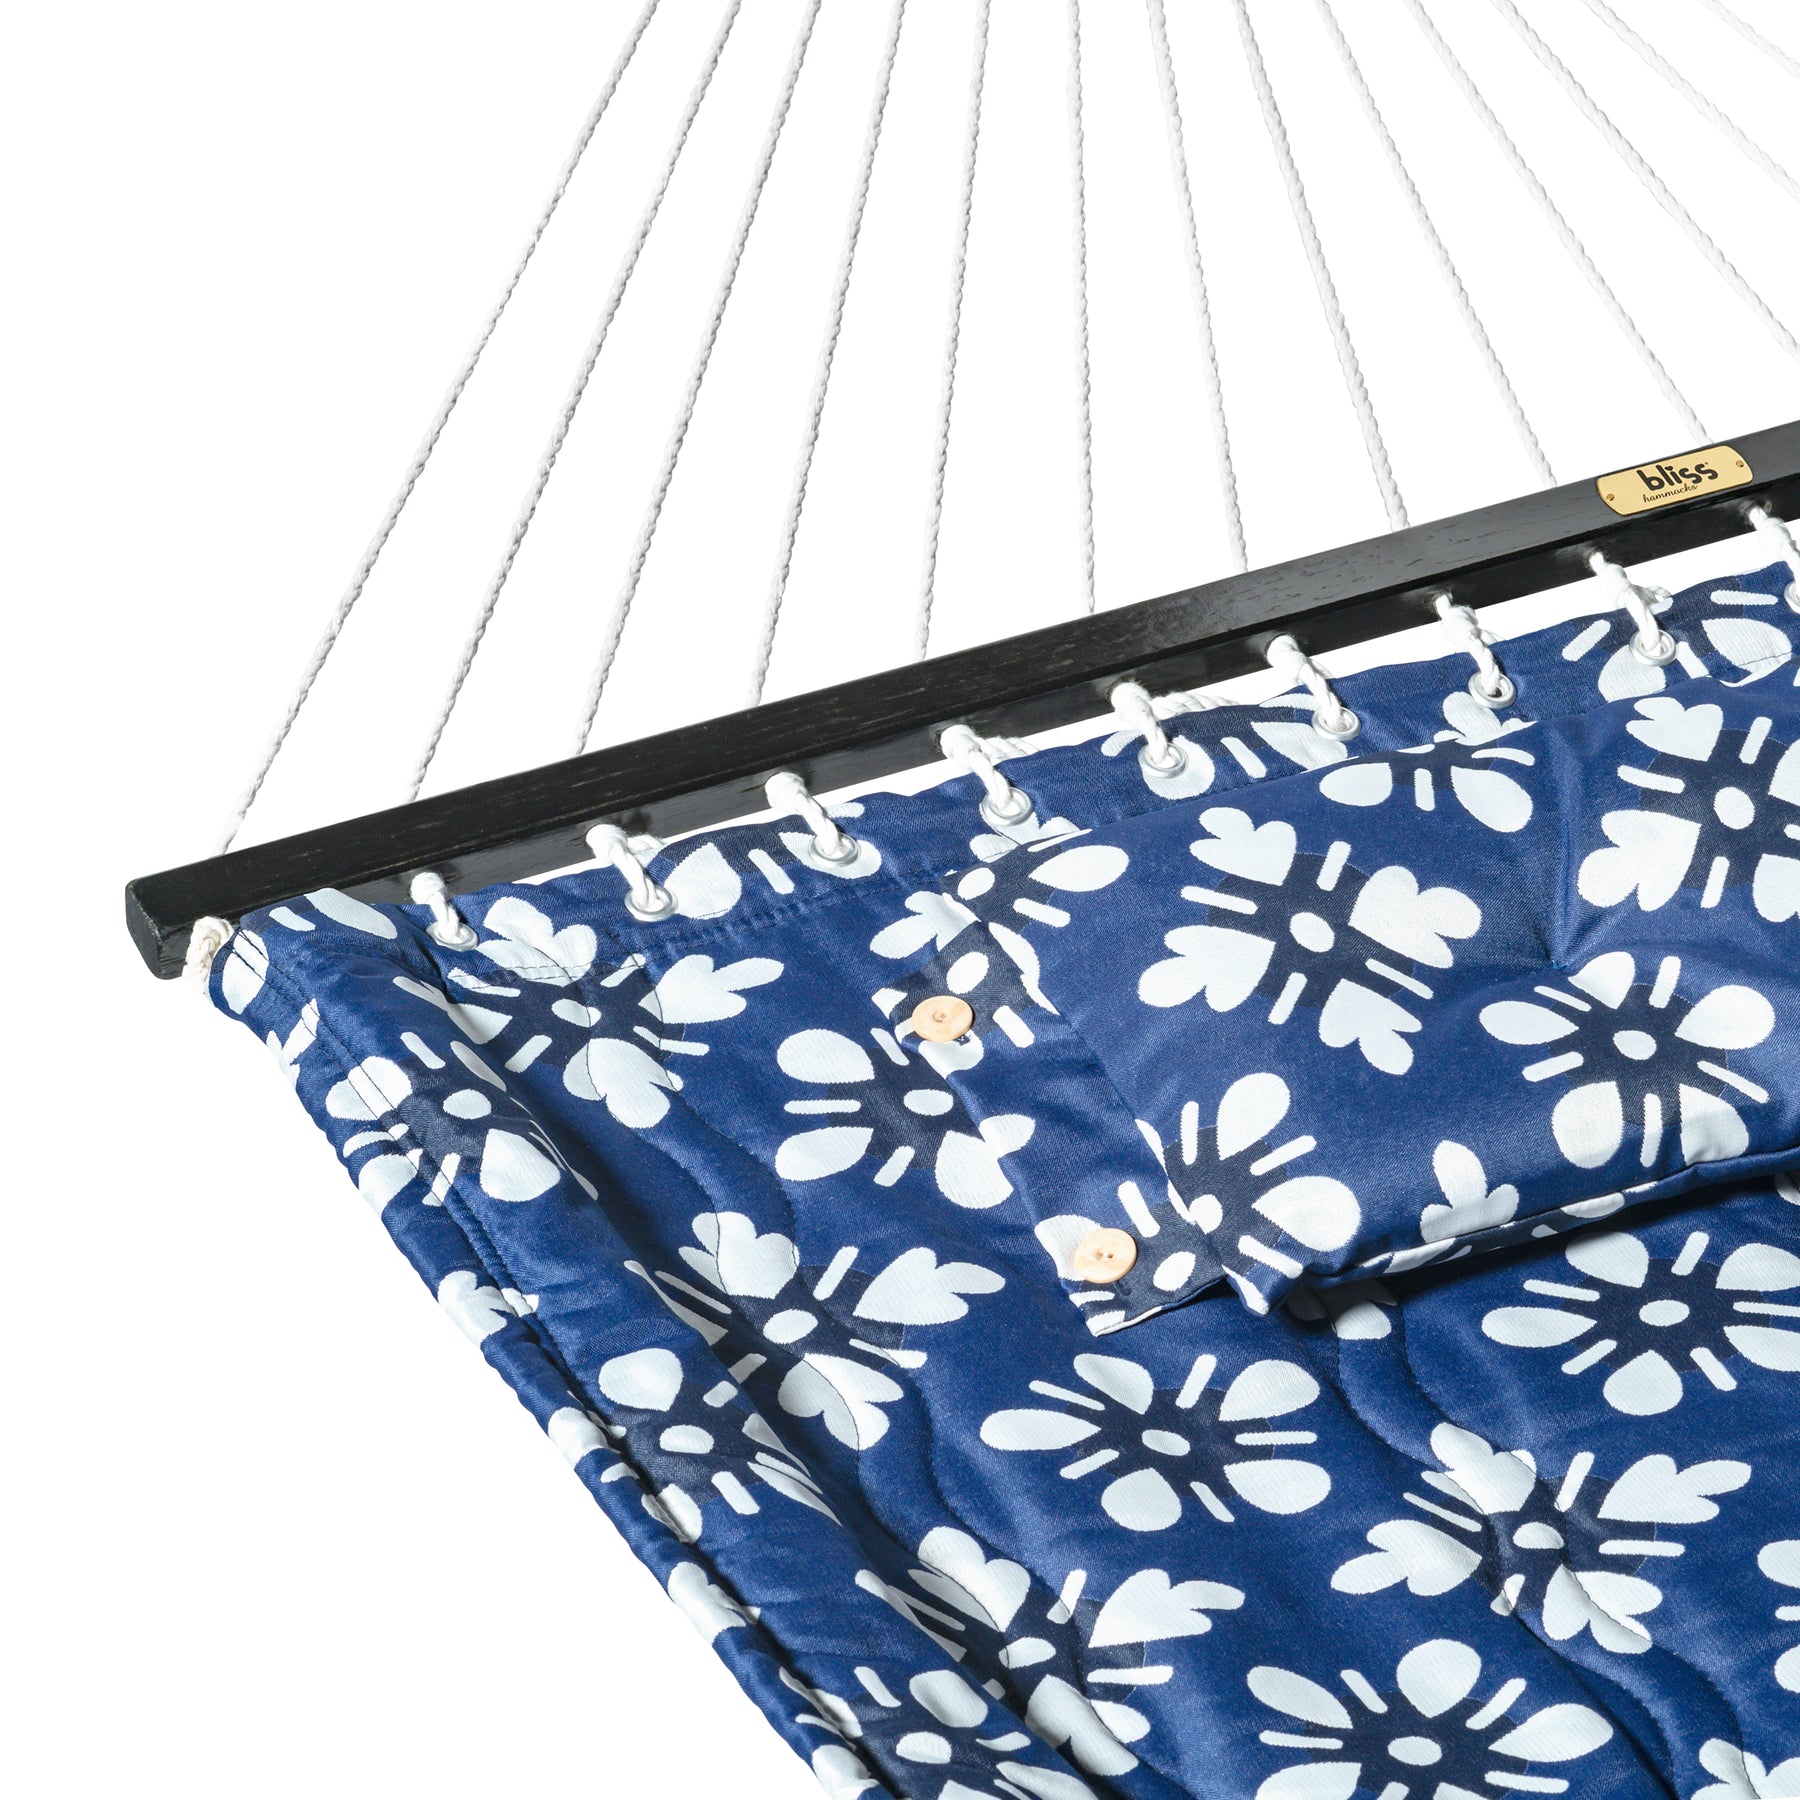 Close-up of the fabric and spreader bar for the Bliss Hammocks 55-inch Wide 2-Person Reversible Quilted Hammock with Spreader Bars and Pillow in the blue flowers variation.